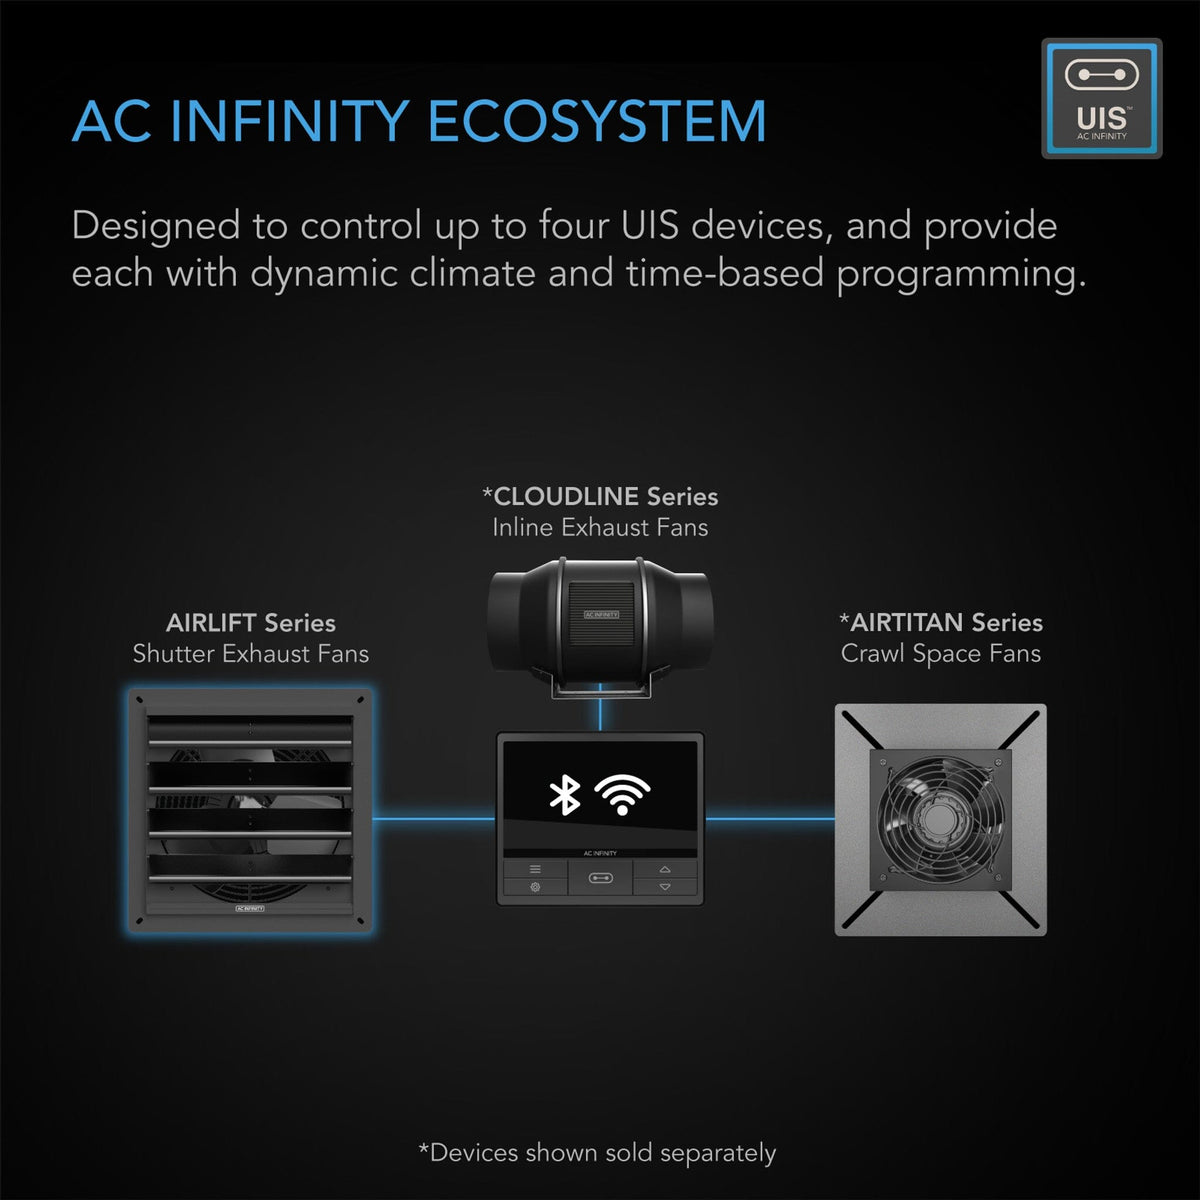 AC Infinity Ecosystem included